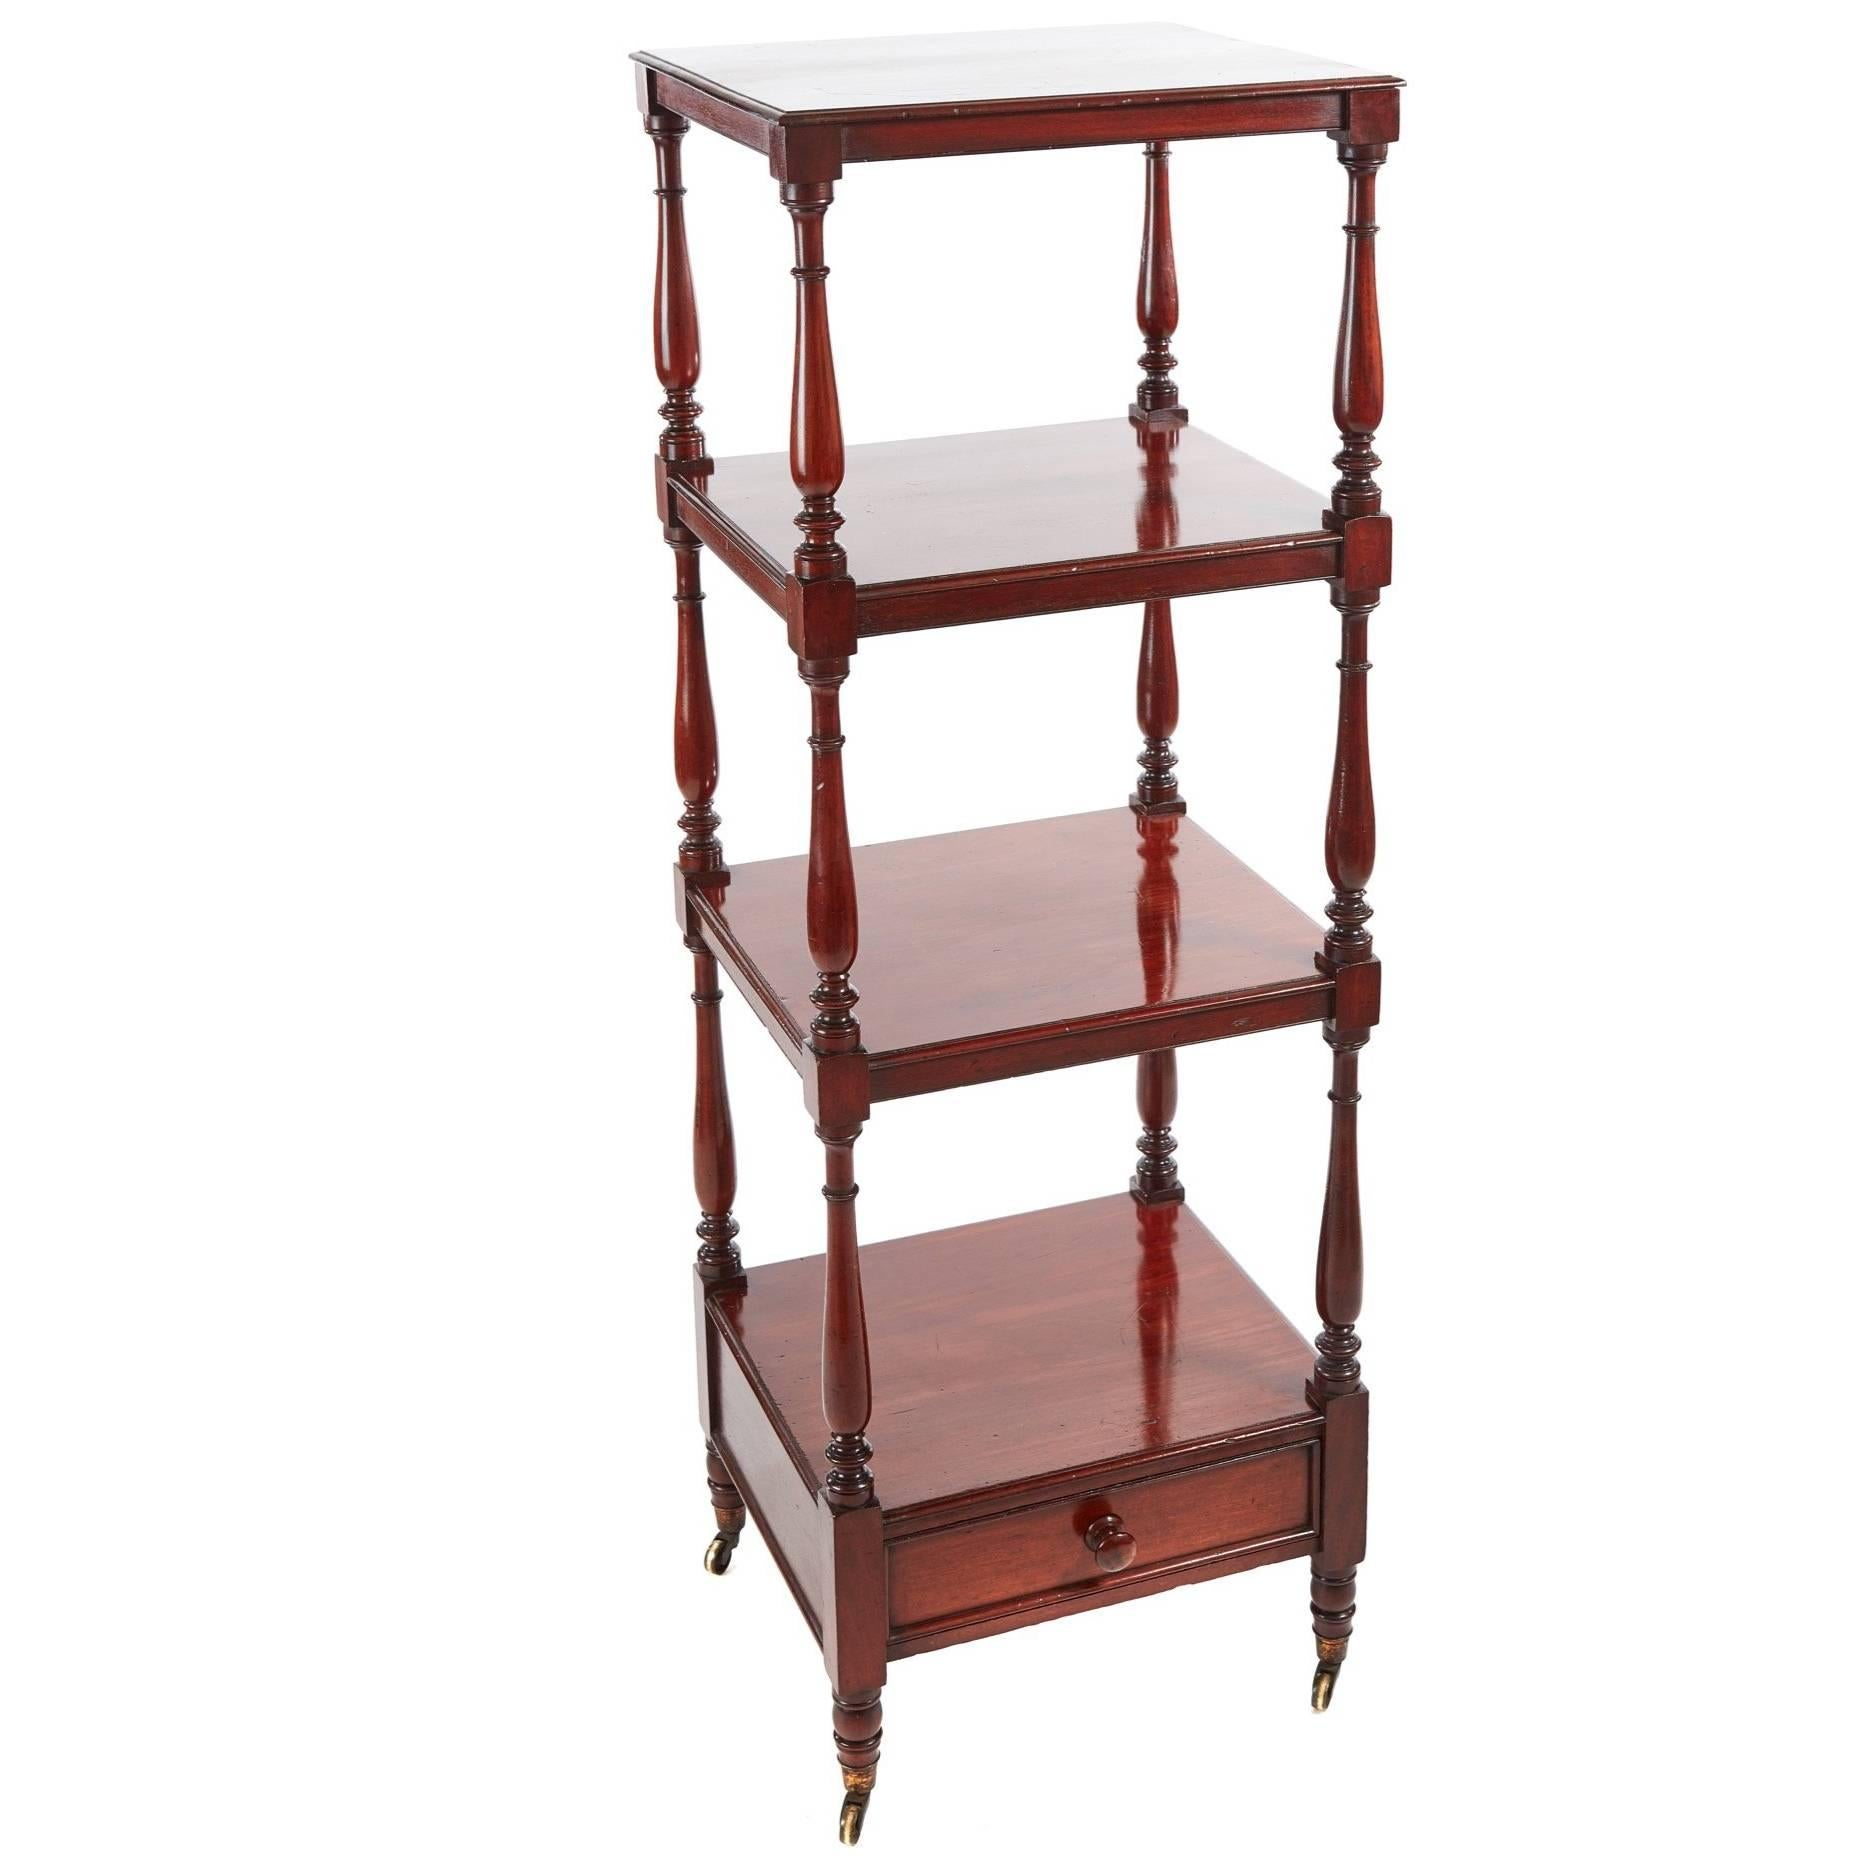 William-IV Mahogany Freestanding Four-Tier Whatnot For Sale